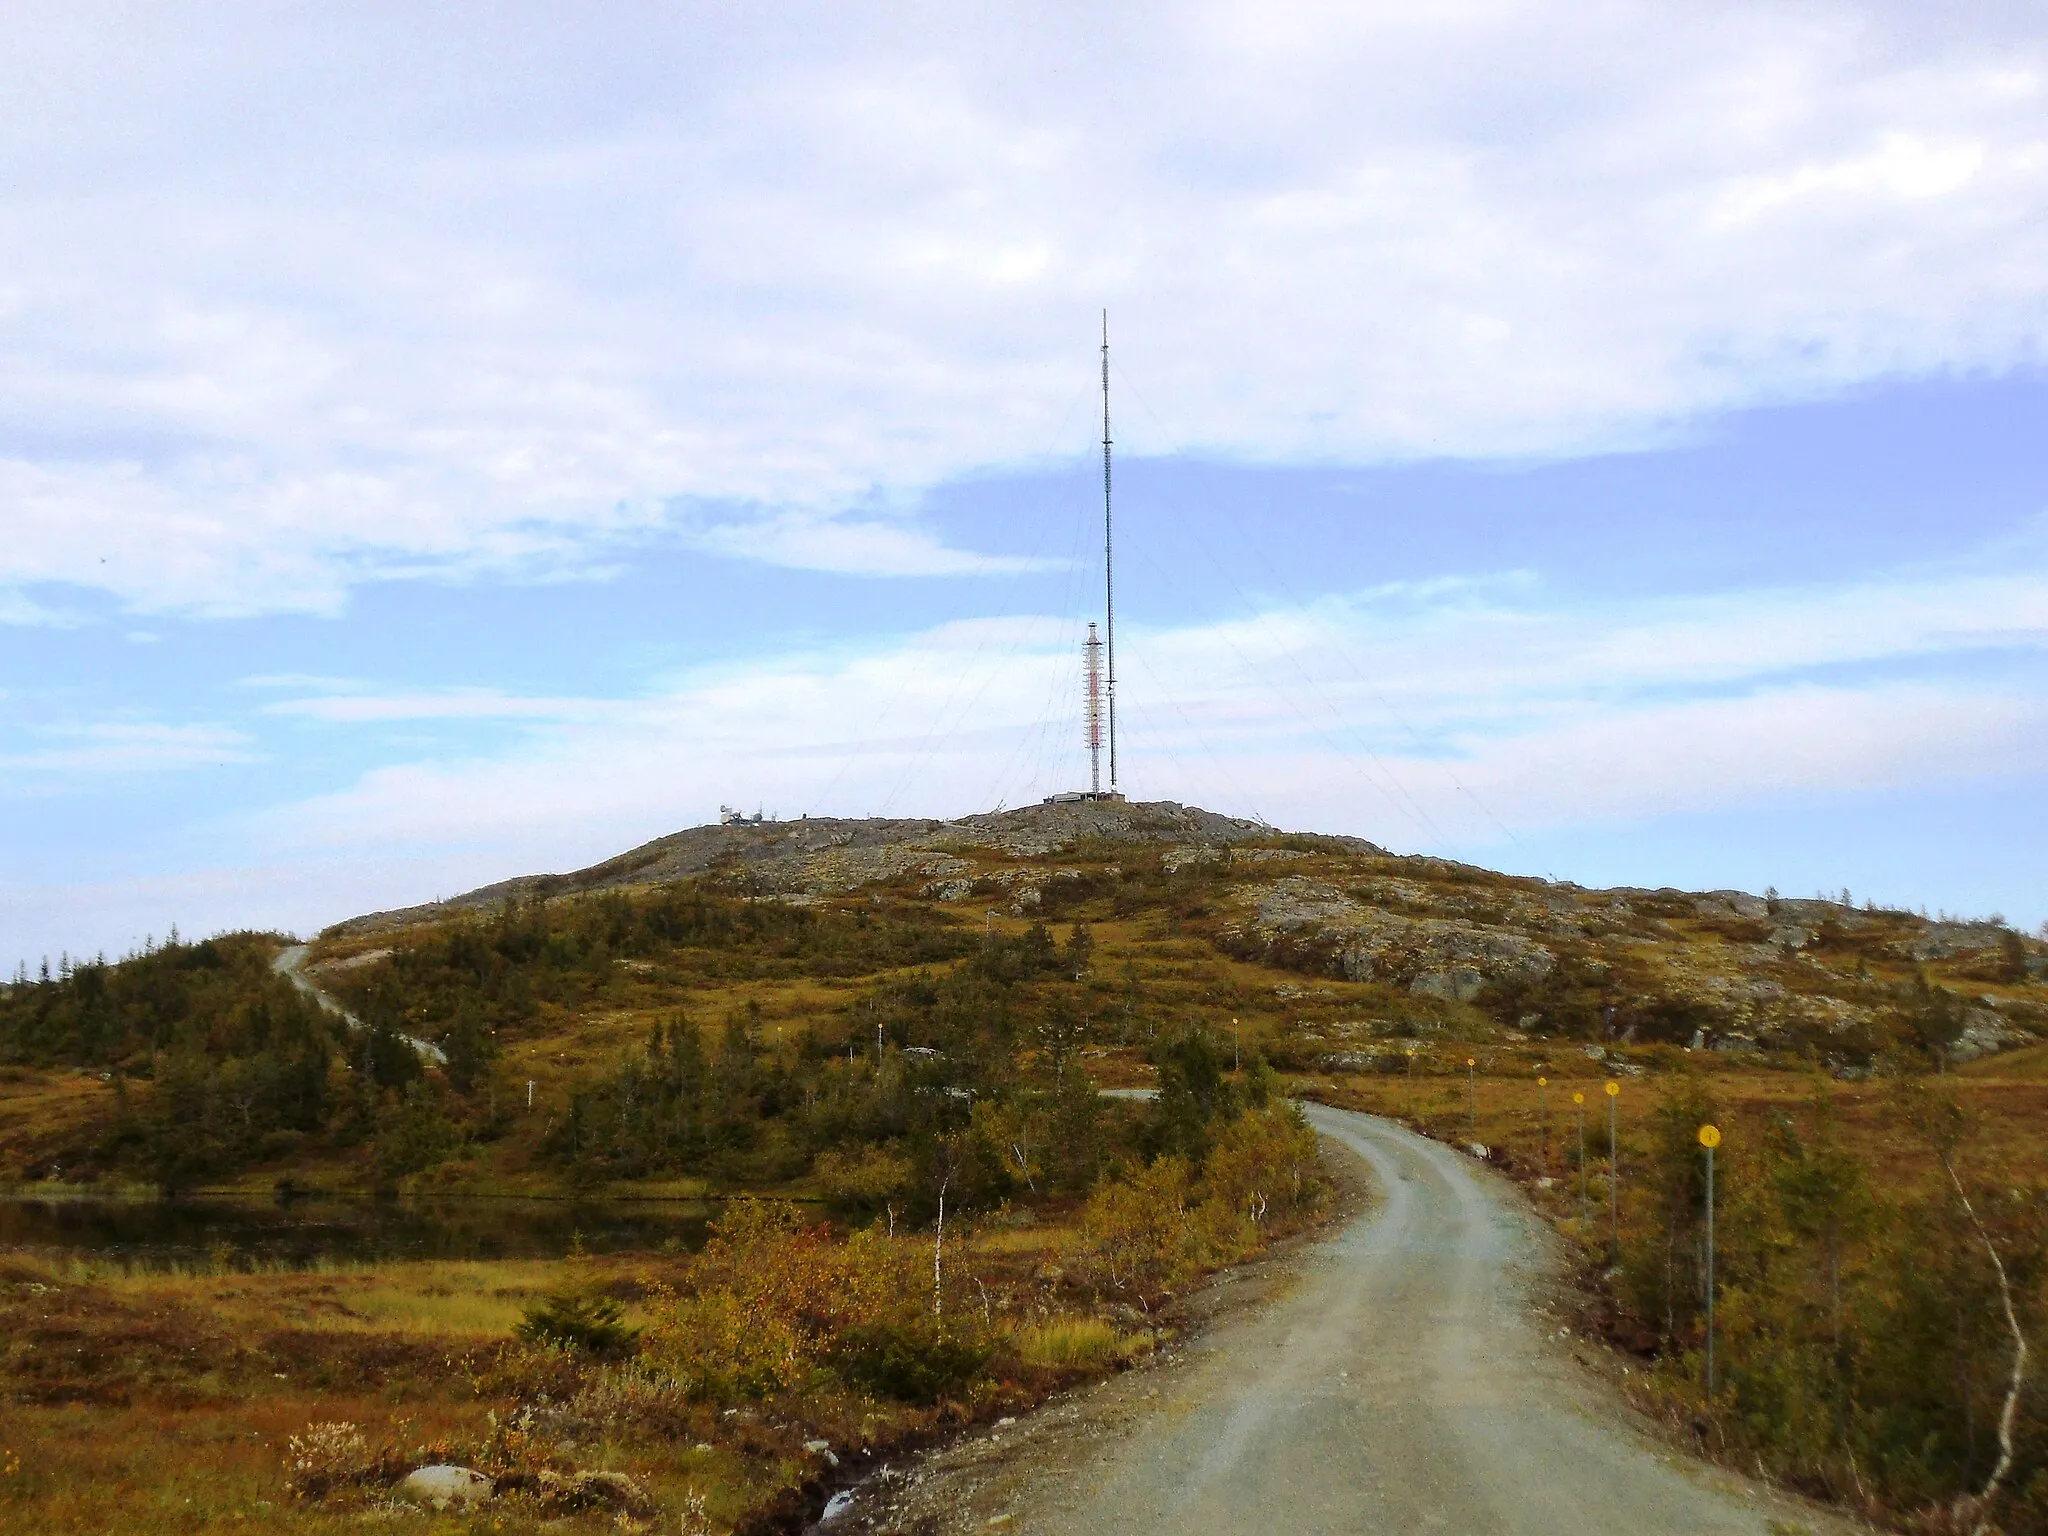 Photo showing: The TV-tower on Vassfjellet, a mountain in Sør-Trøndelag, Norway. The short antenna were built in 1961 for analog television. It was disconnected in 2009 and demolished in 2013. The long antenna were made for digital terrestrial television. It was raised in 2007 and put into use in 2009